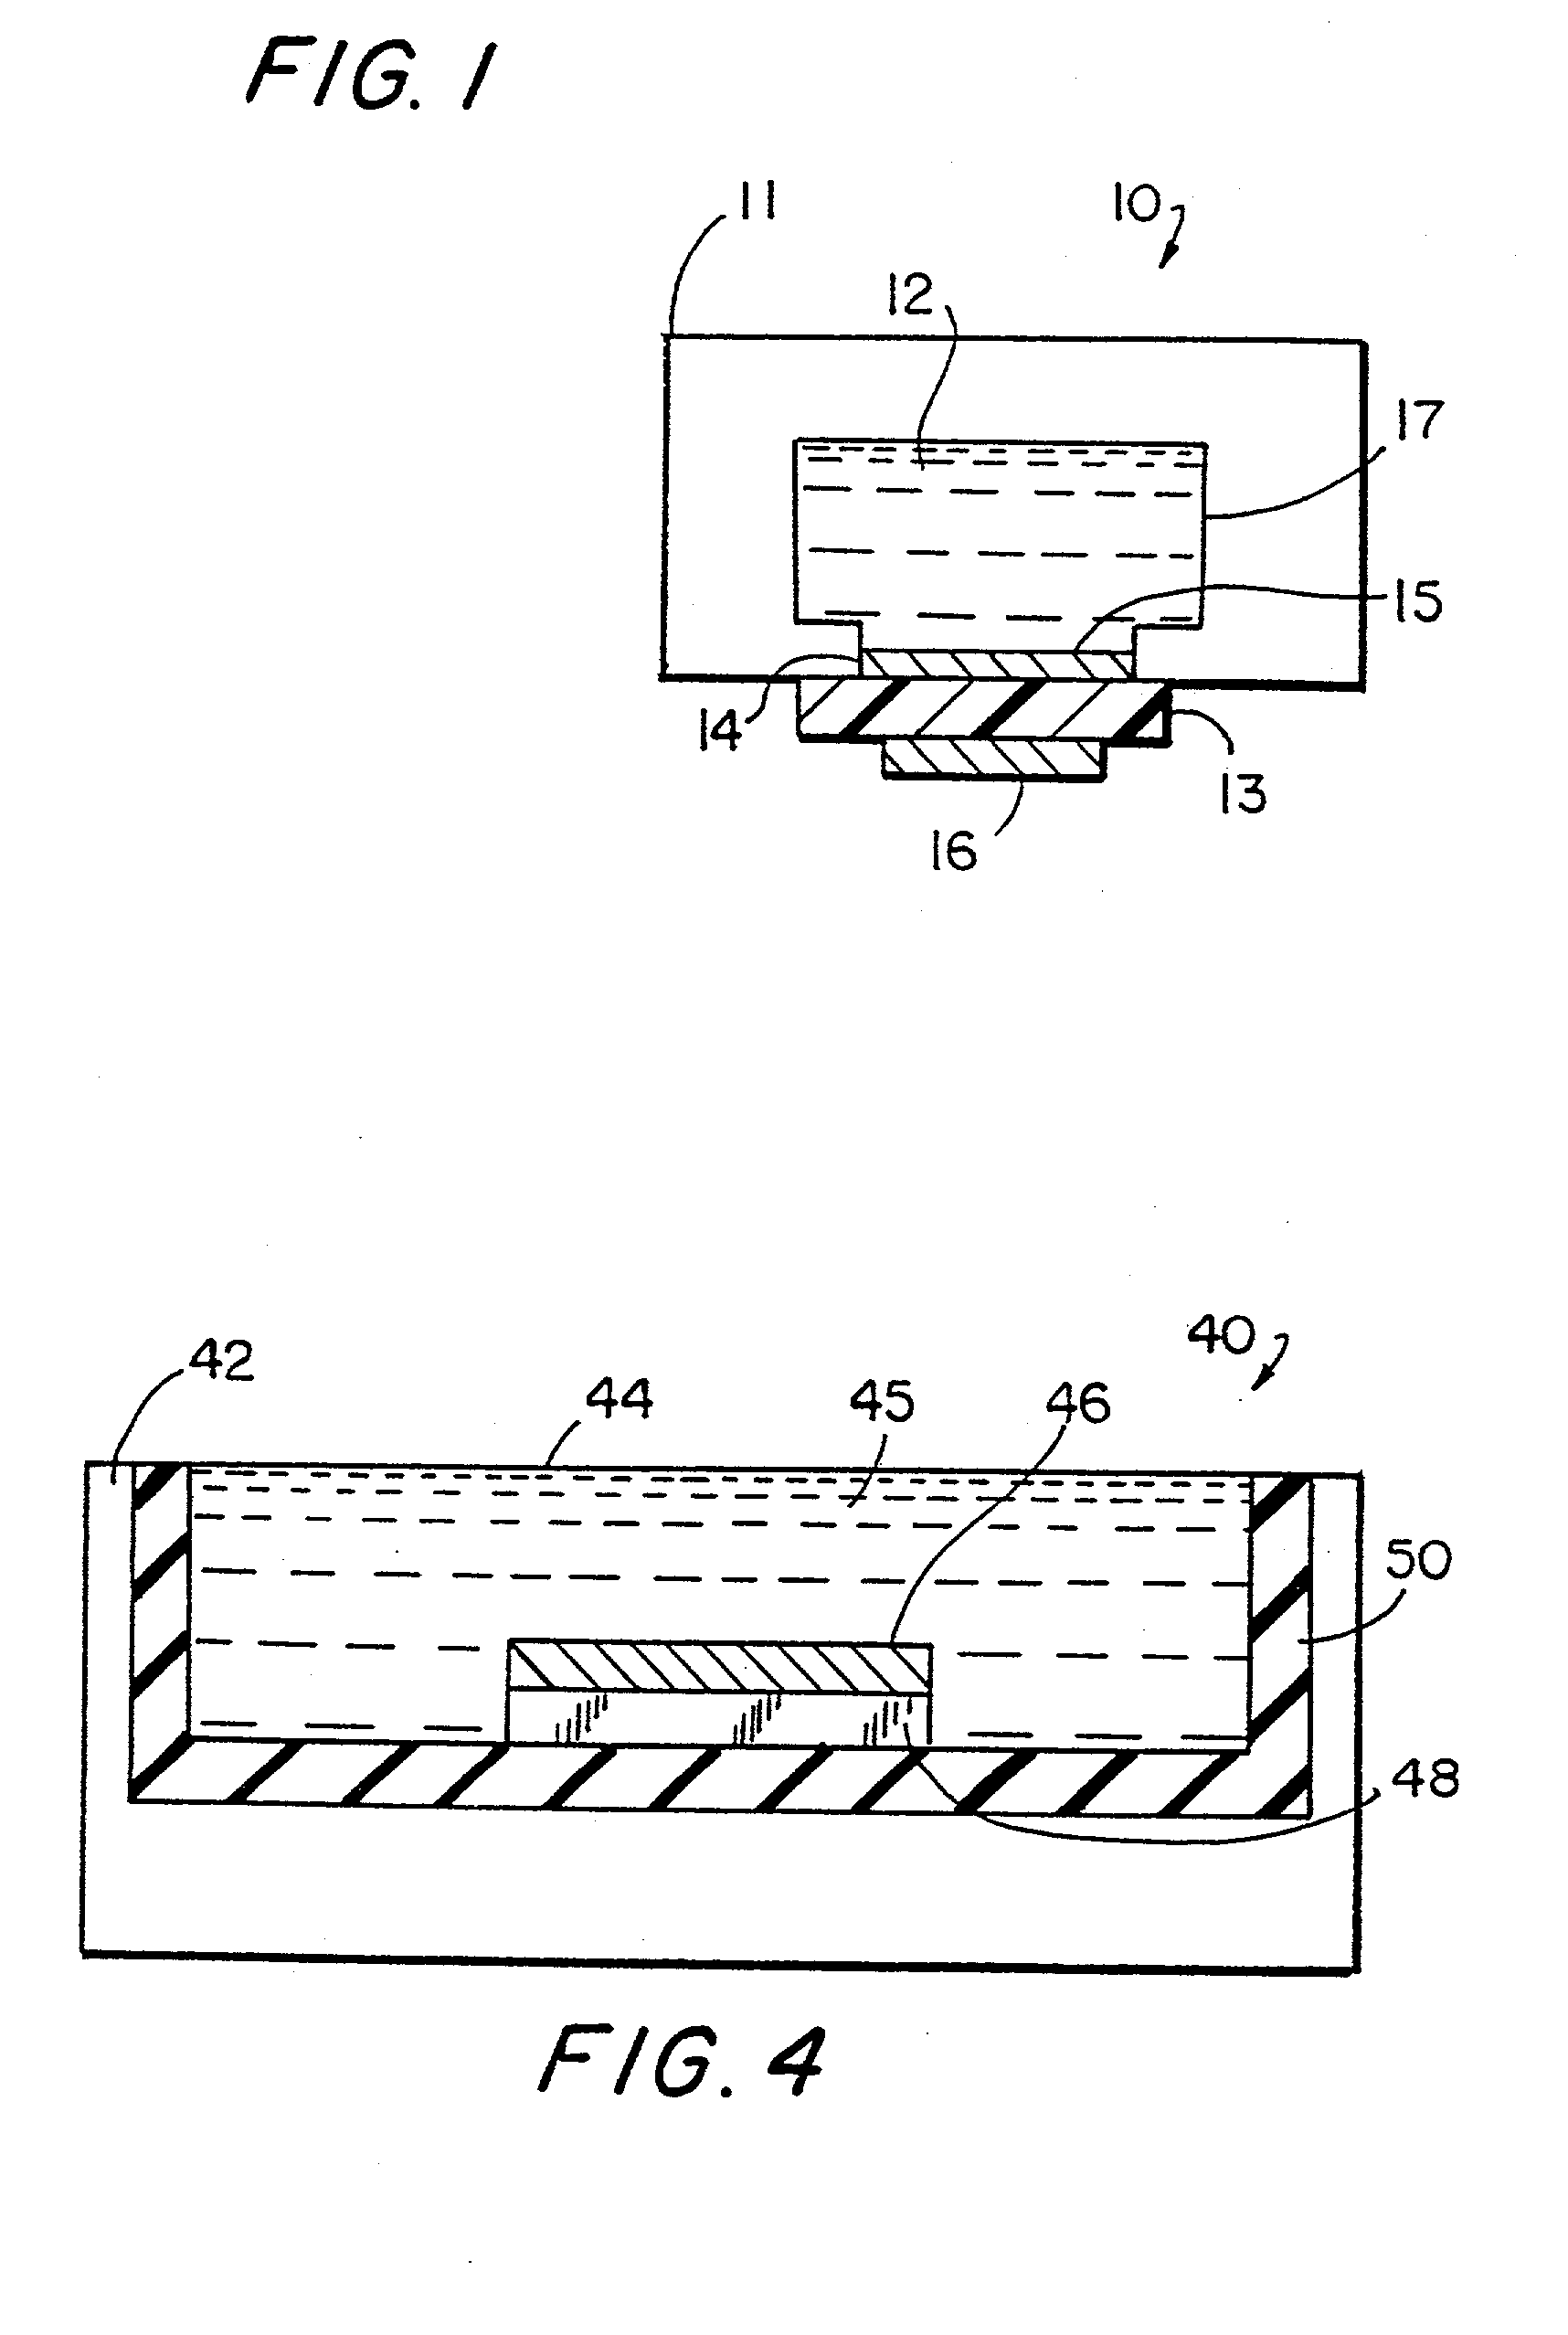 Assay sonication apparatus and methodology